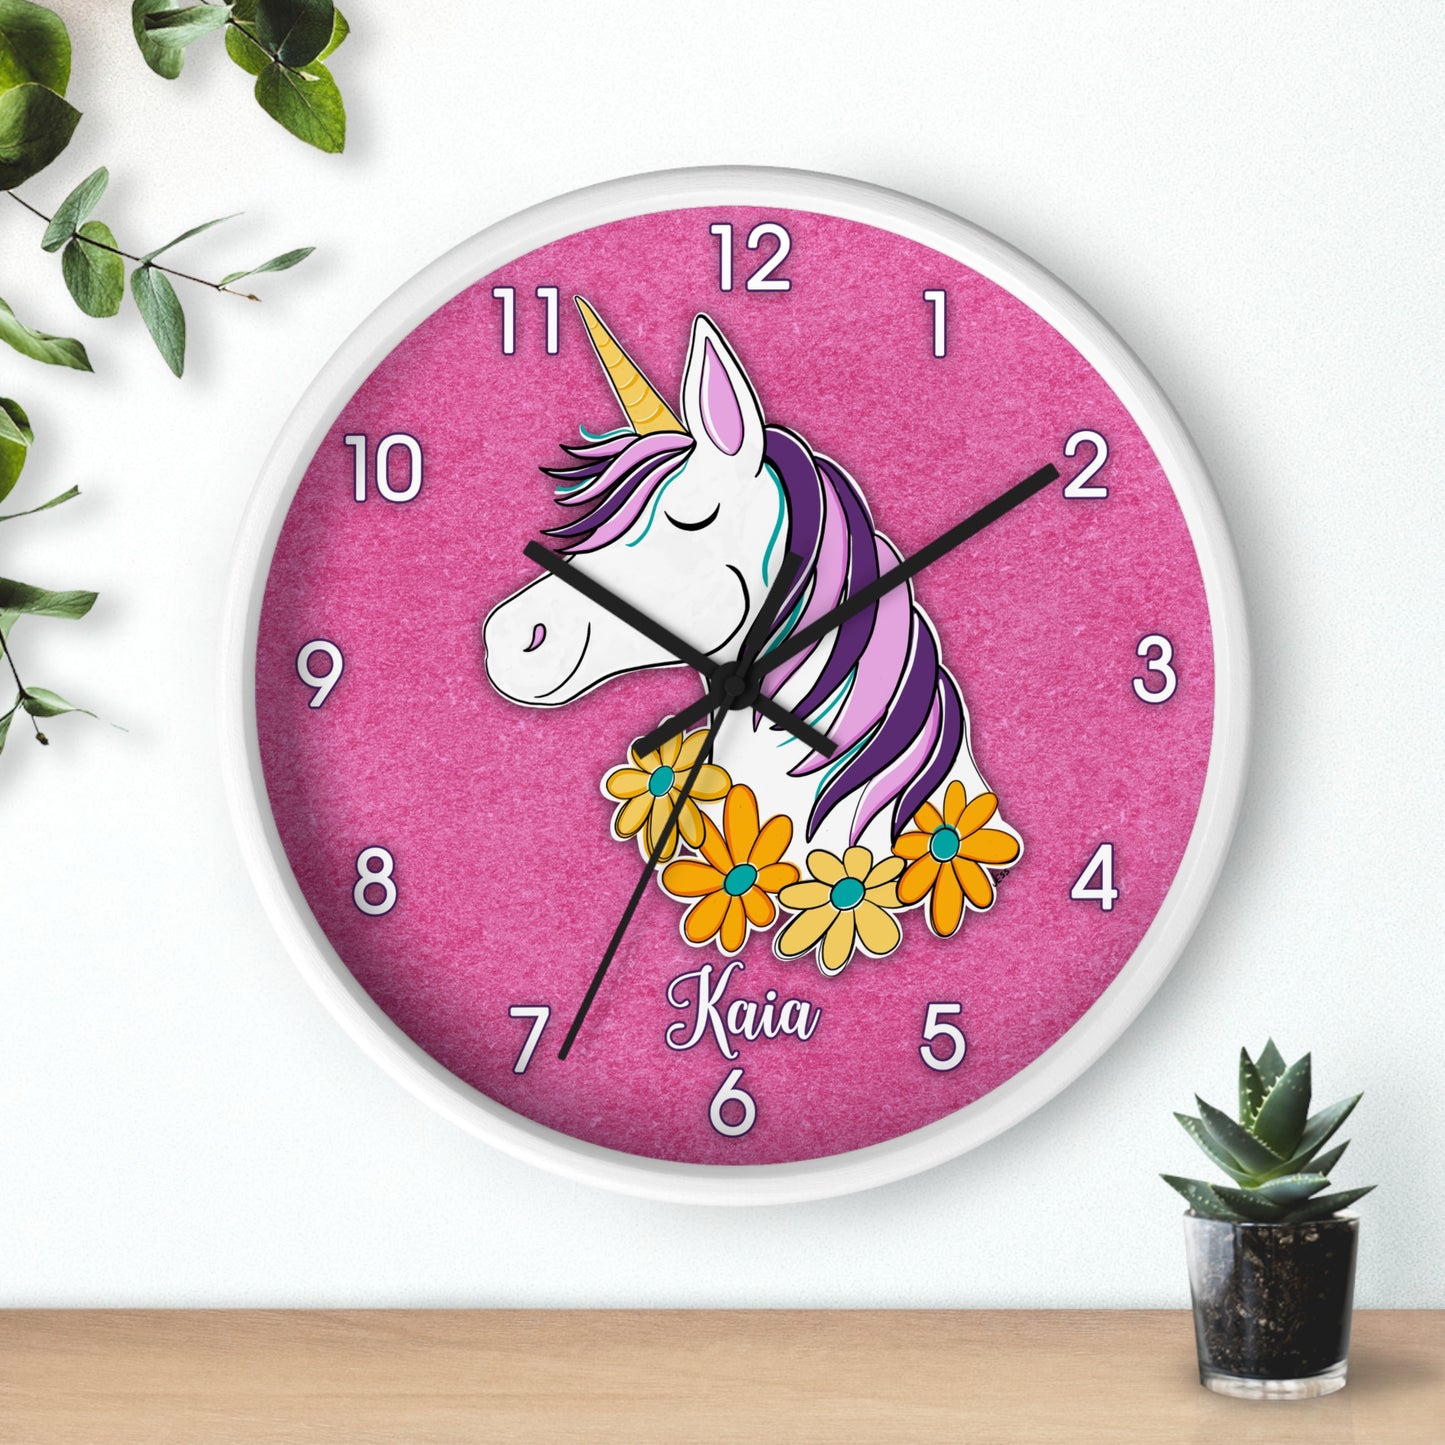 Unicorn Wall Clock in Pink - Personalized Name